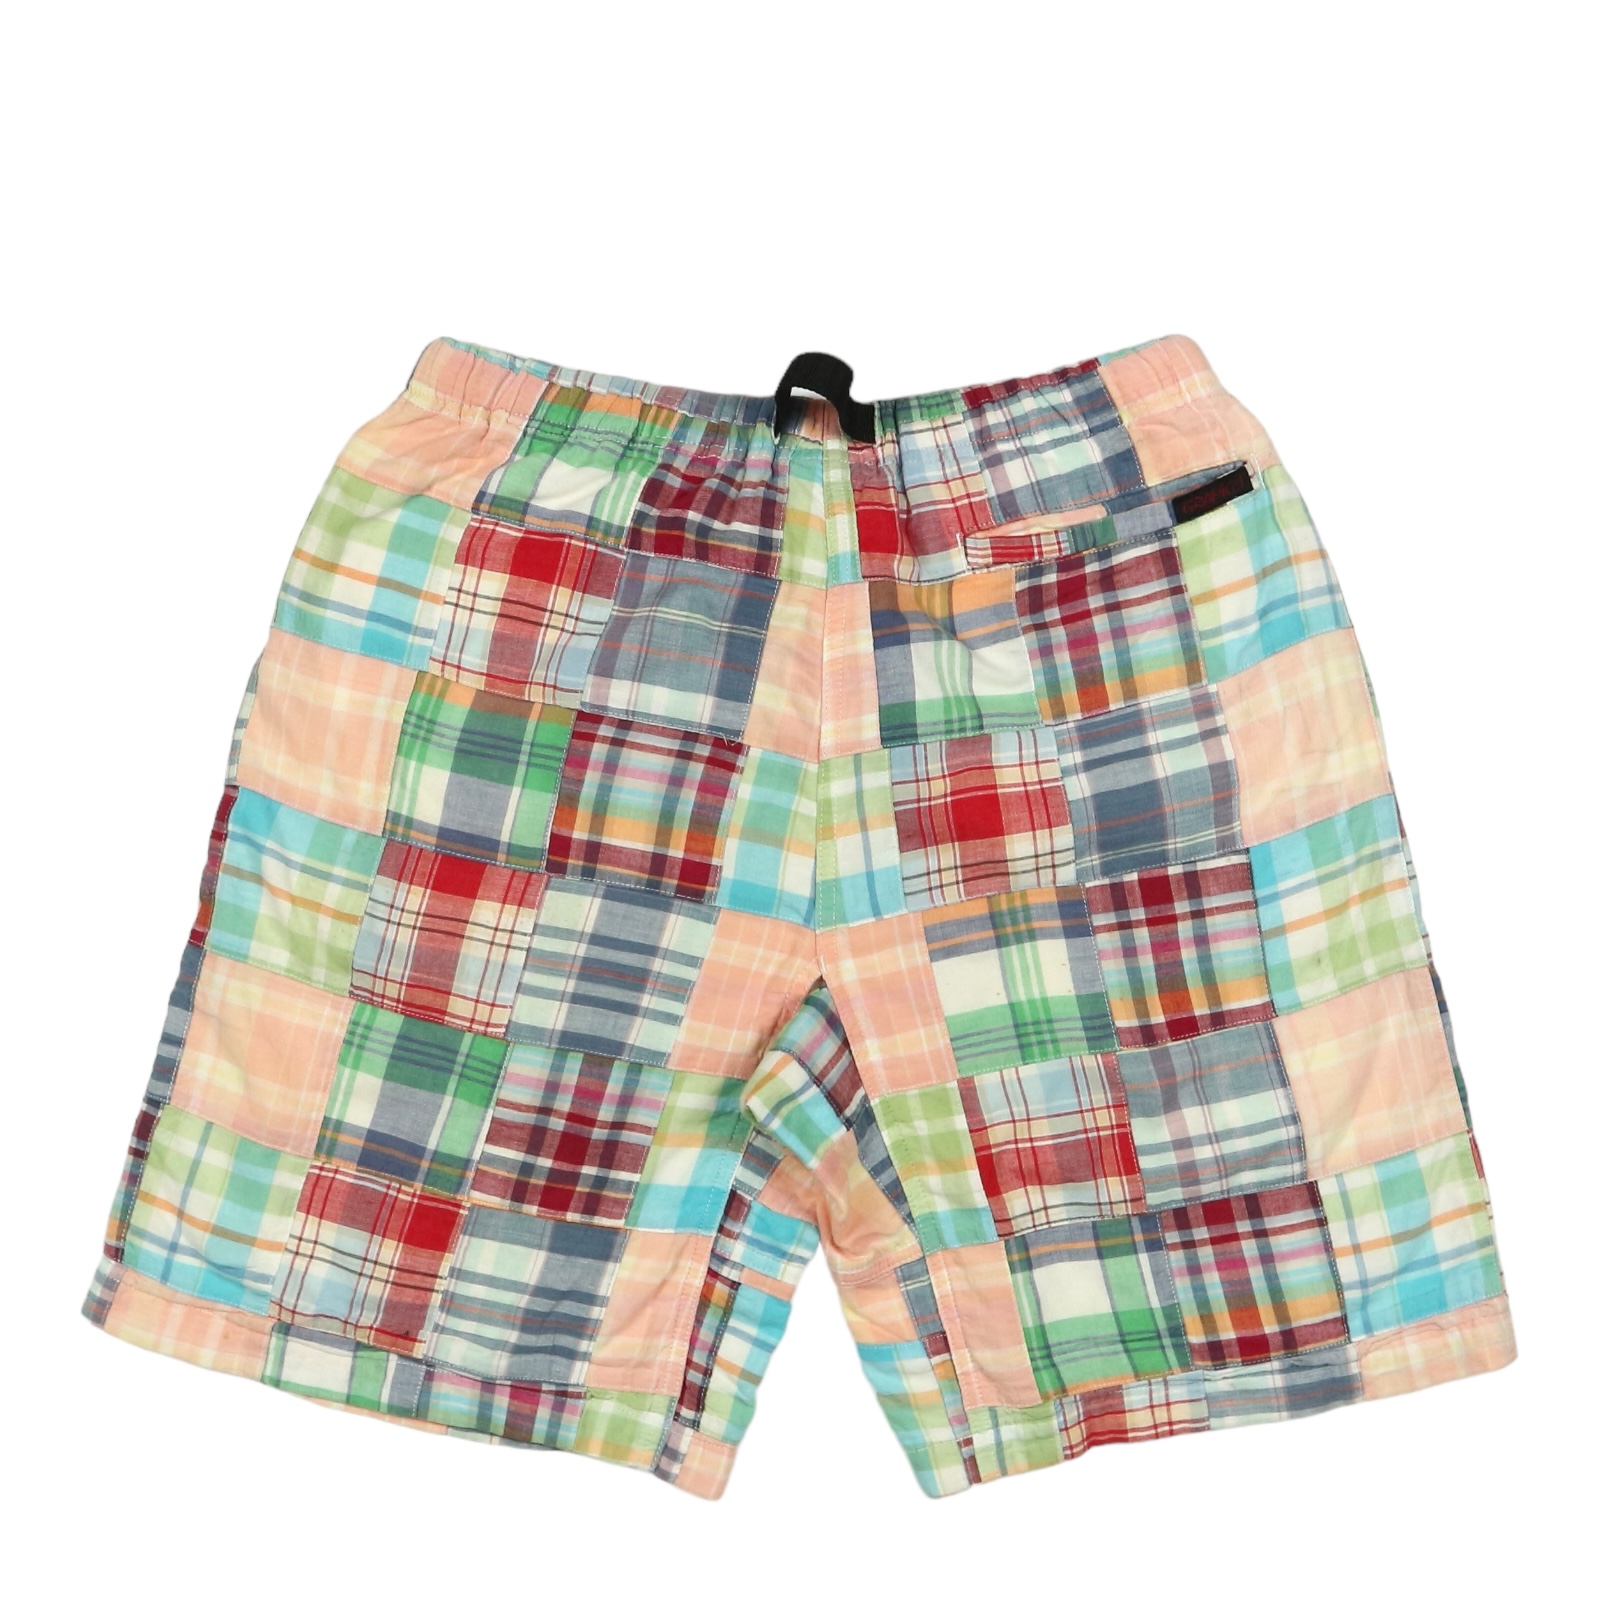 Gramicci Outdoor Shorts Size S